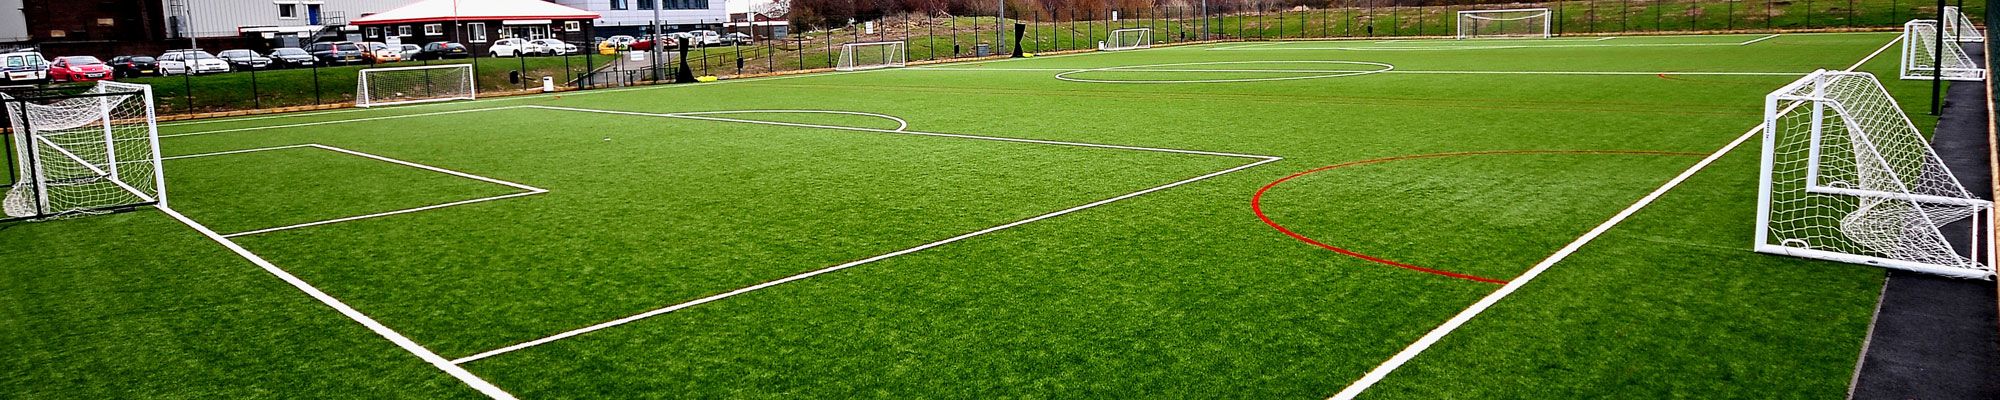 Football pitch in Blackpool